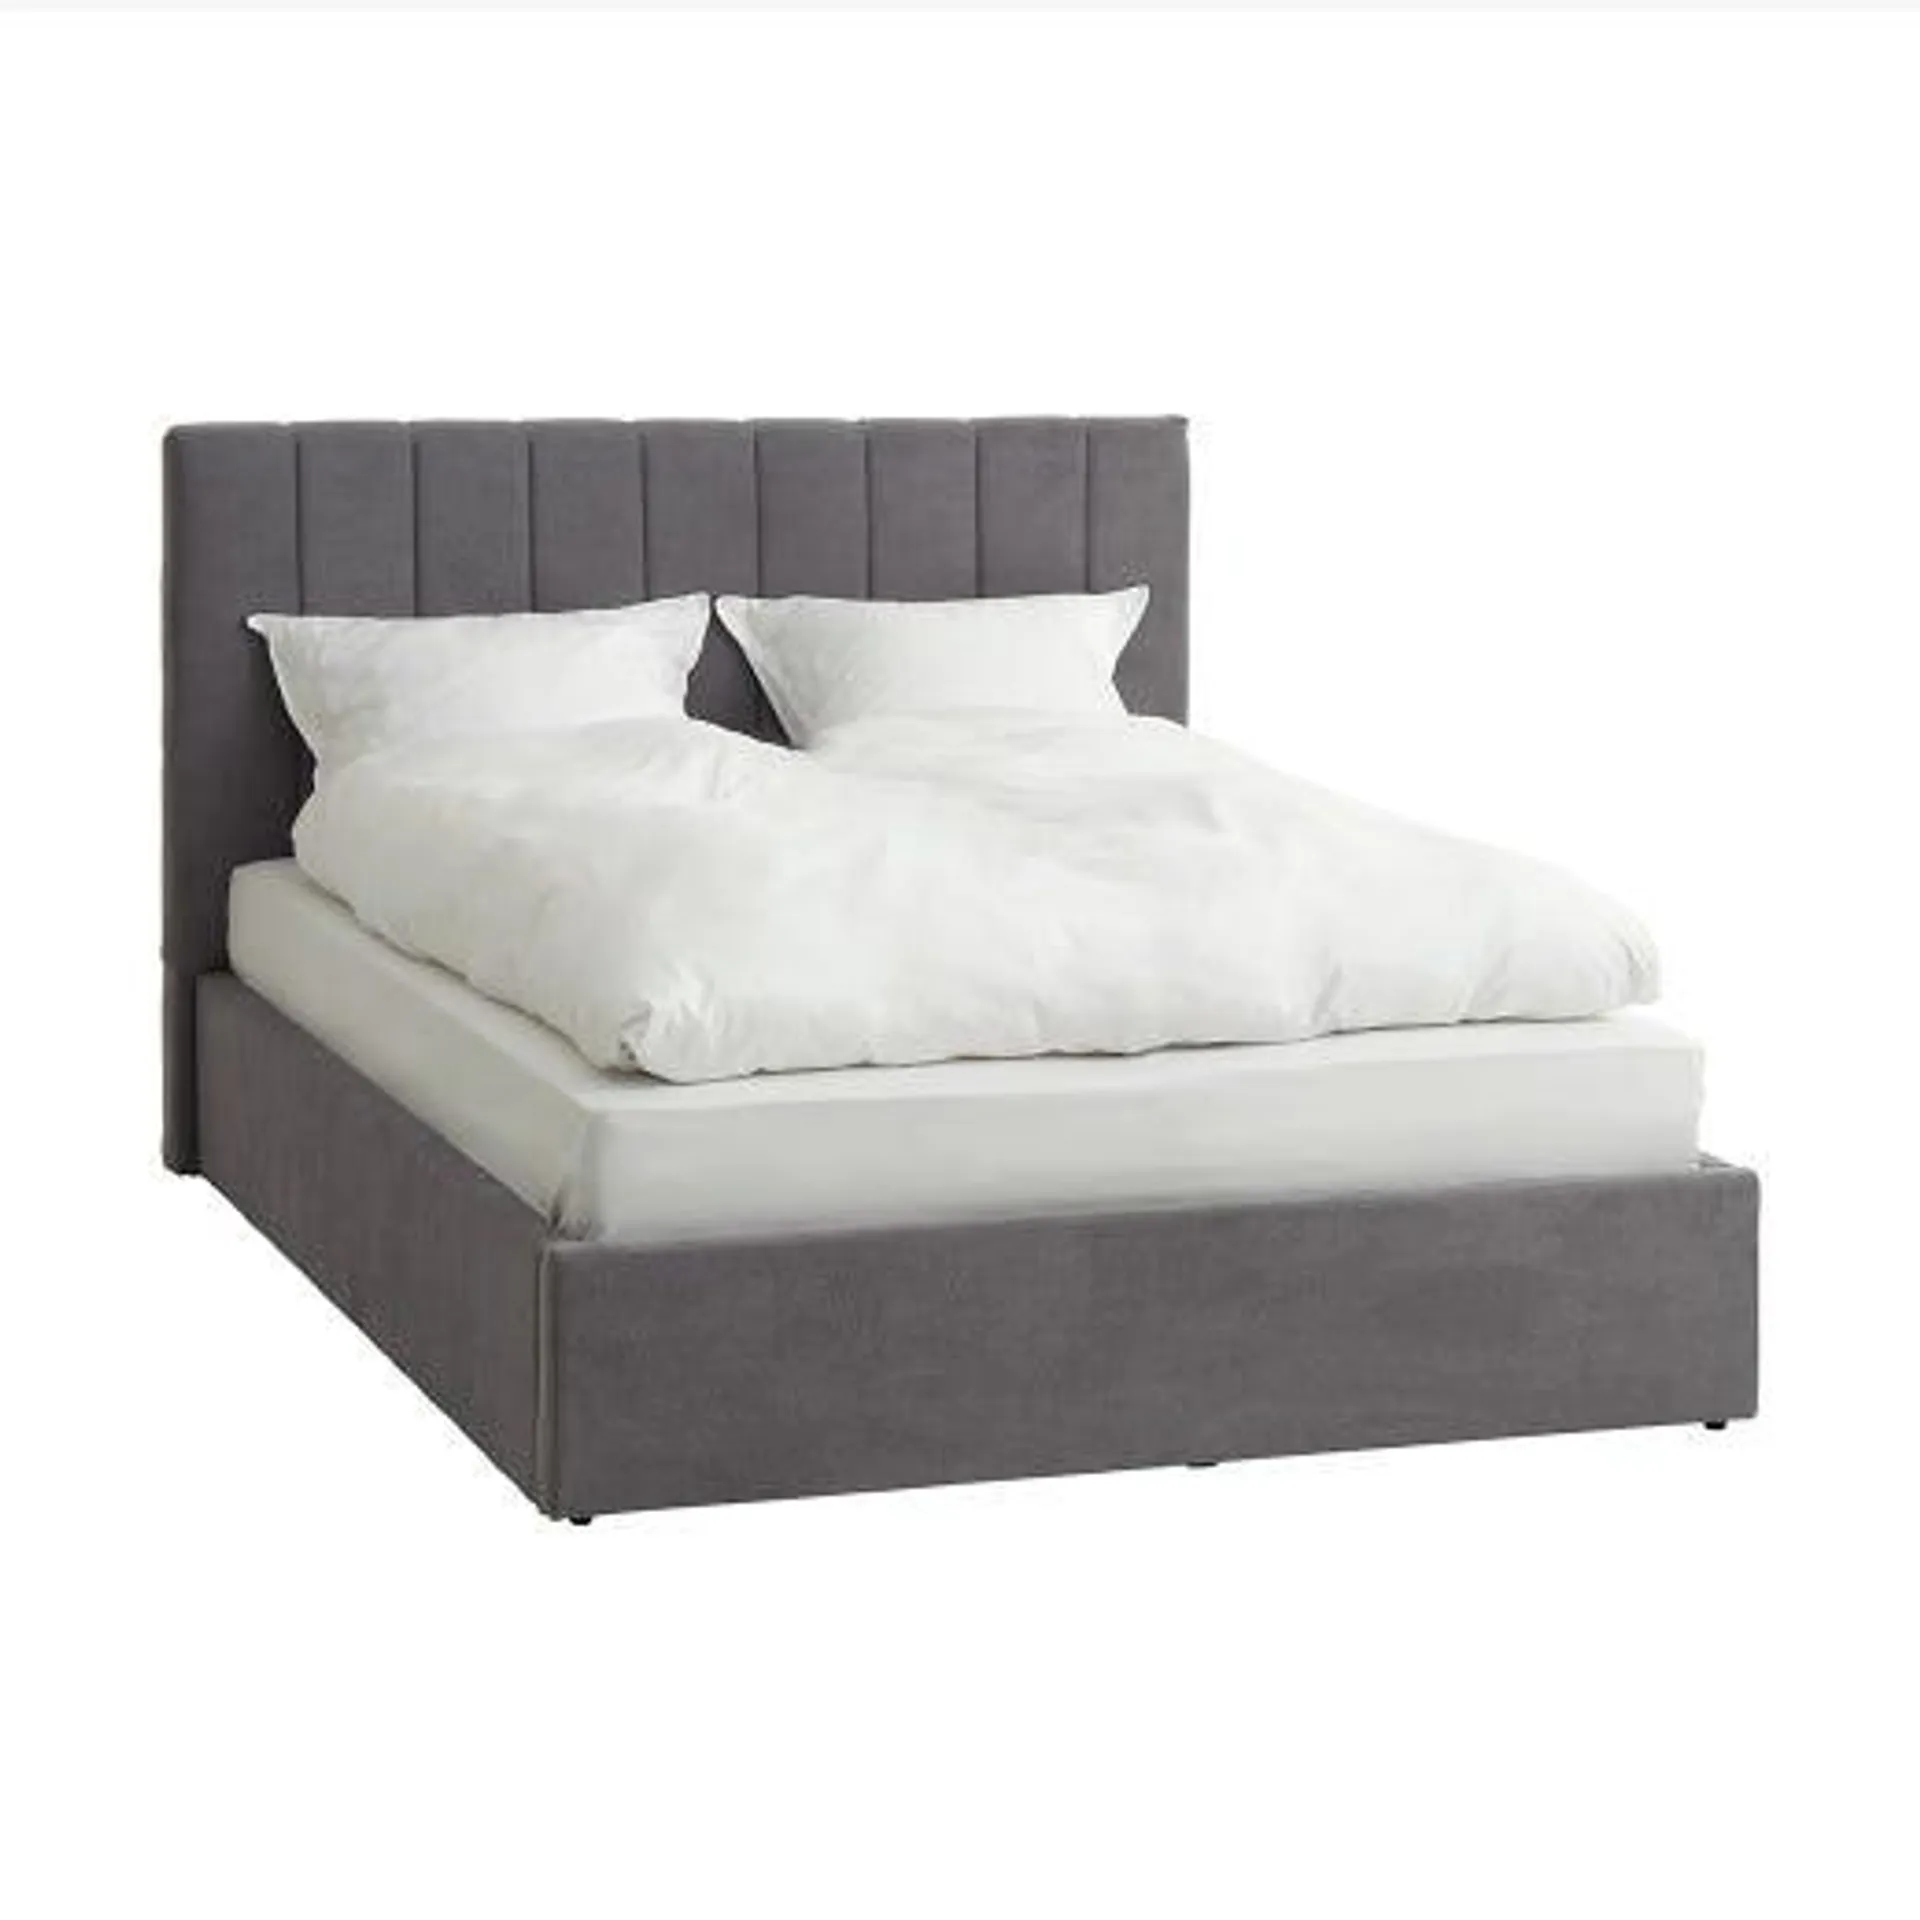 Bed Frame With Storage (Queen)